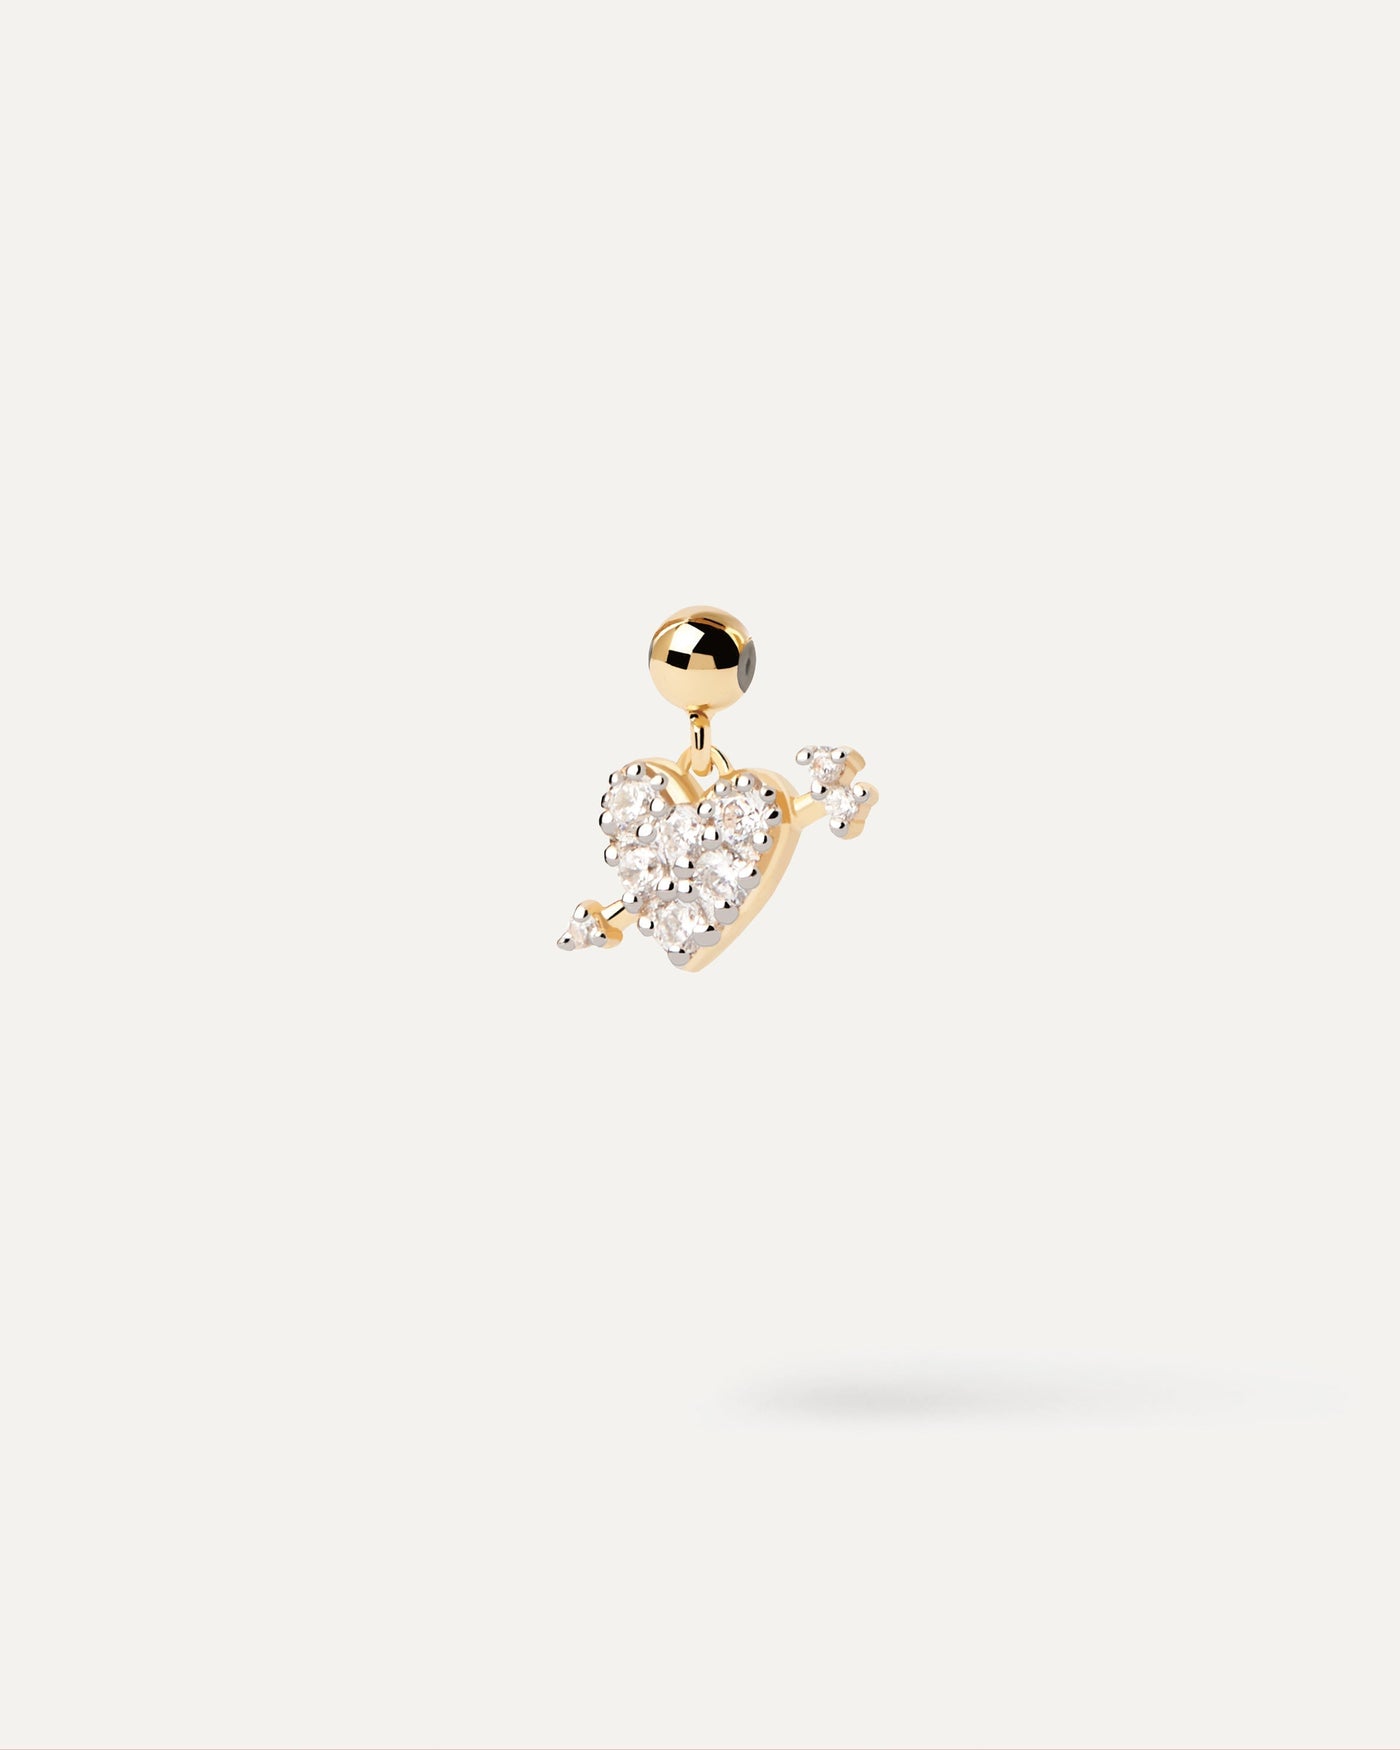 2023 Selection | Mon Amour Charm. Get the latest arrival from PDPAOLA. Place your order safely and get this Best Seller. Free Shipping.